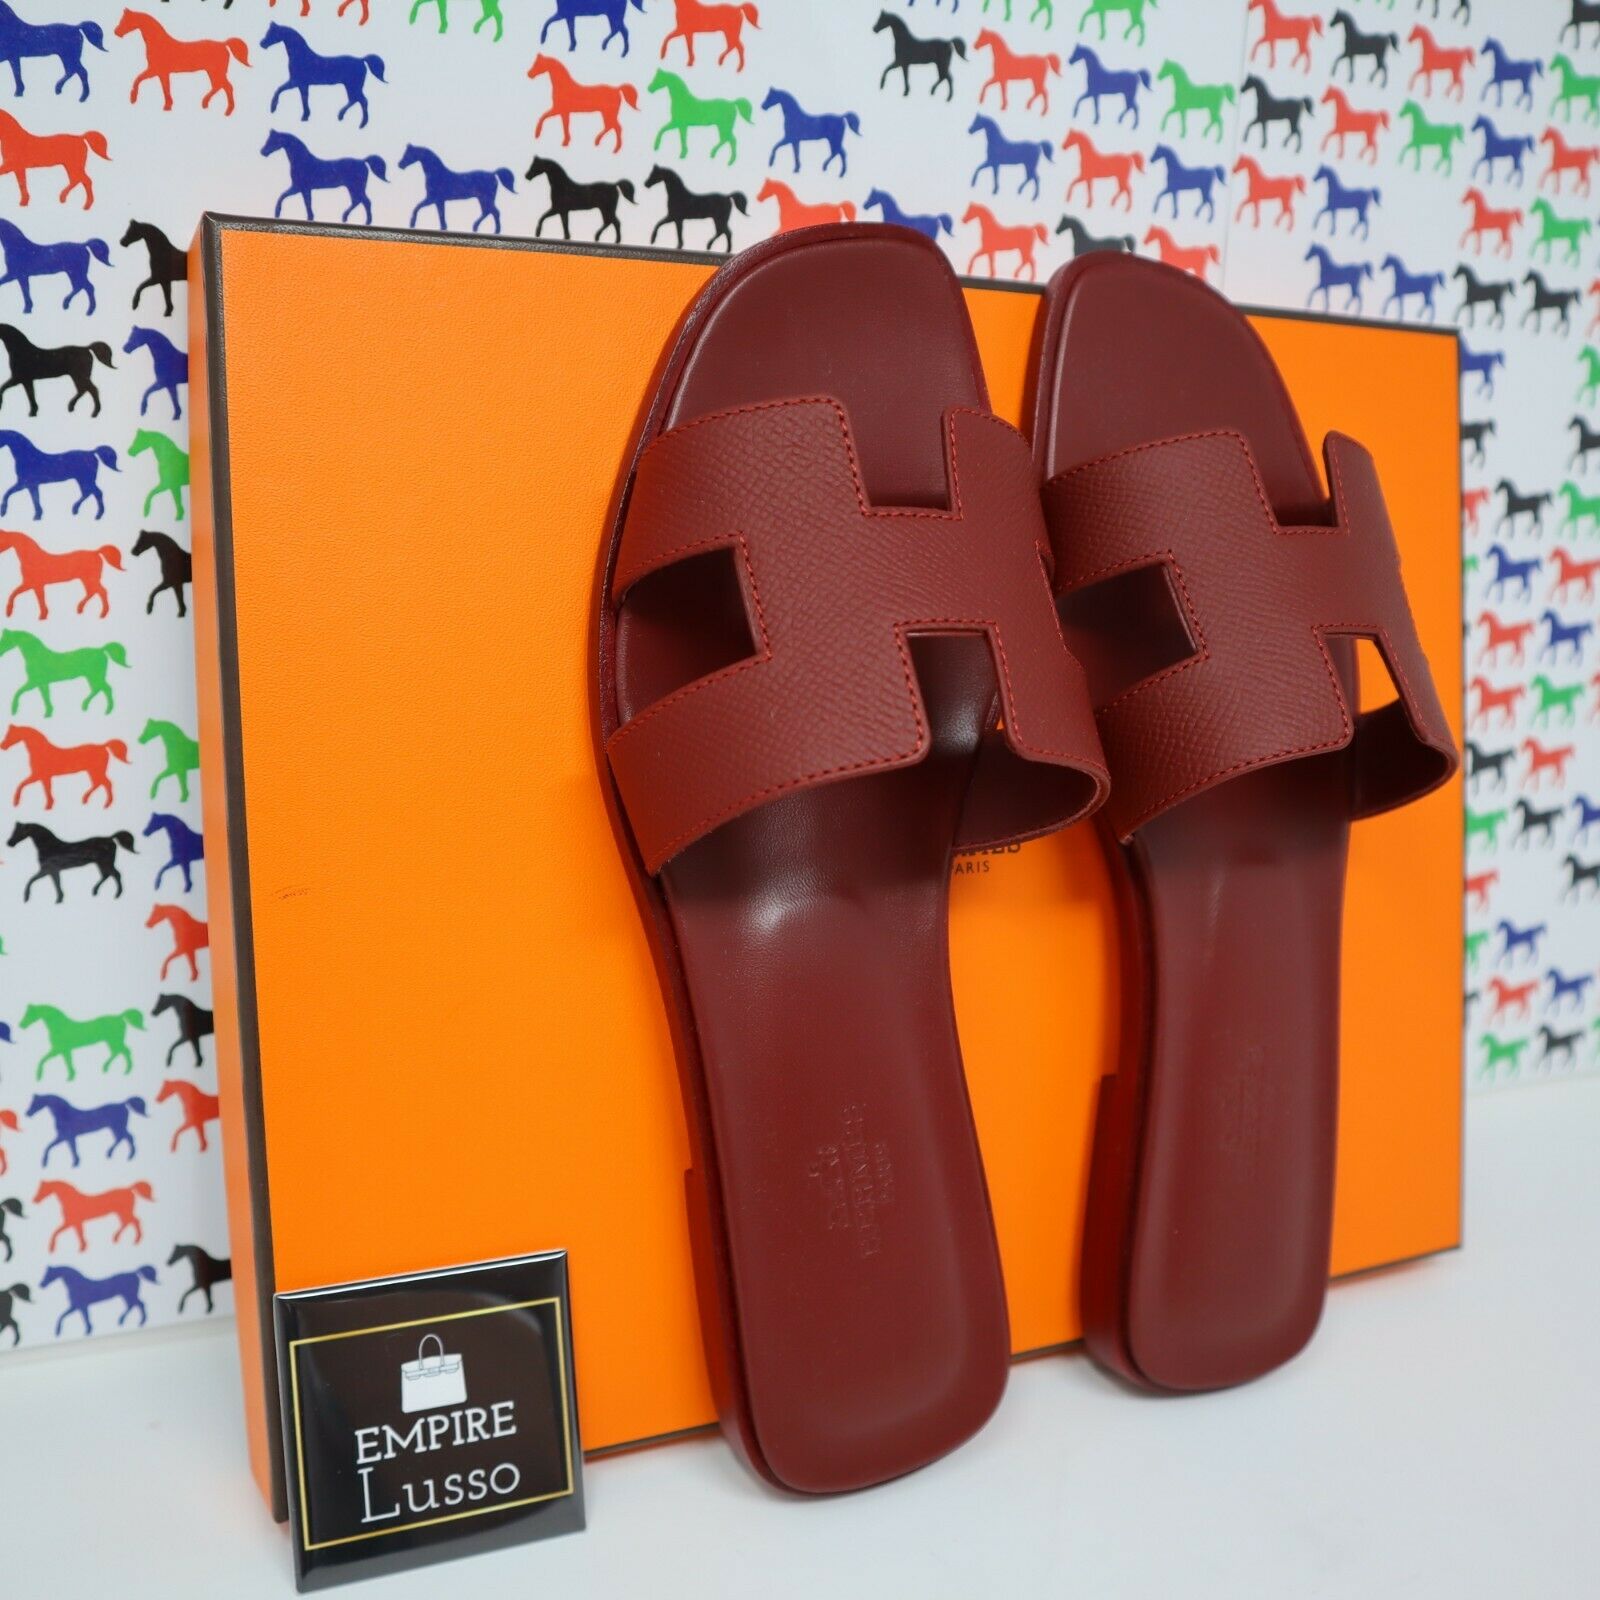 36 NEW HERMES ORAN H SANDALS SLIPPERS CLASSIC EPSOM ROUGE H RED DEEP D –  Empire Lusso